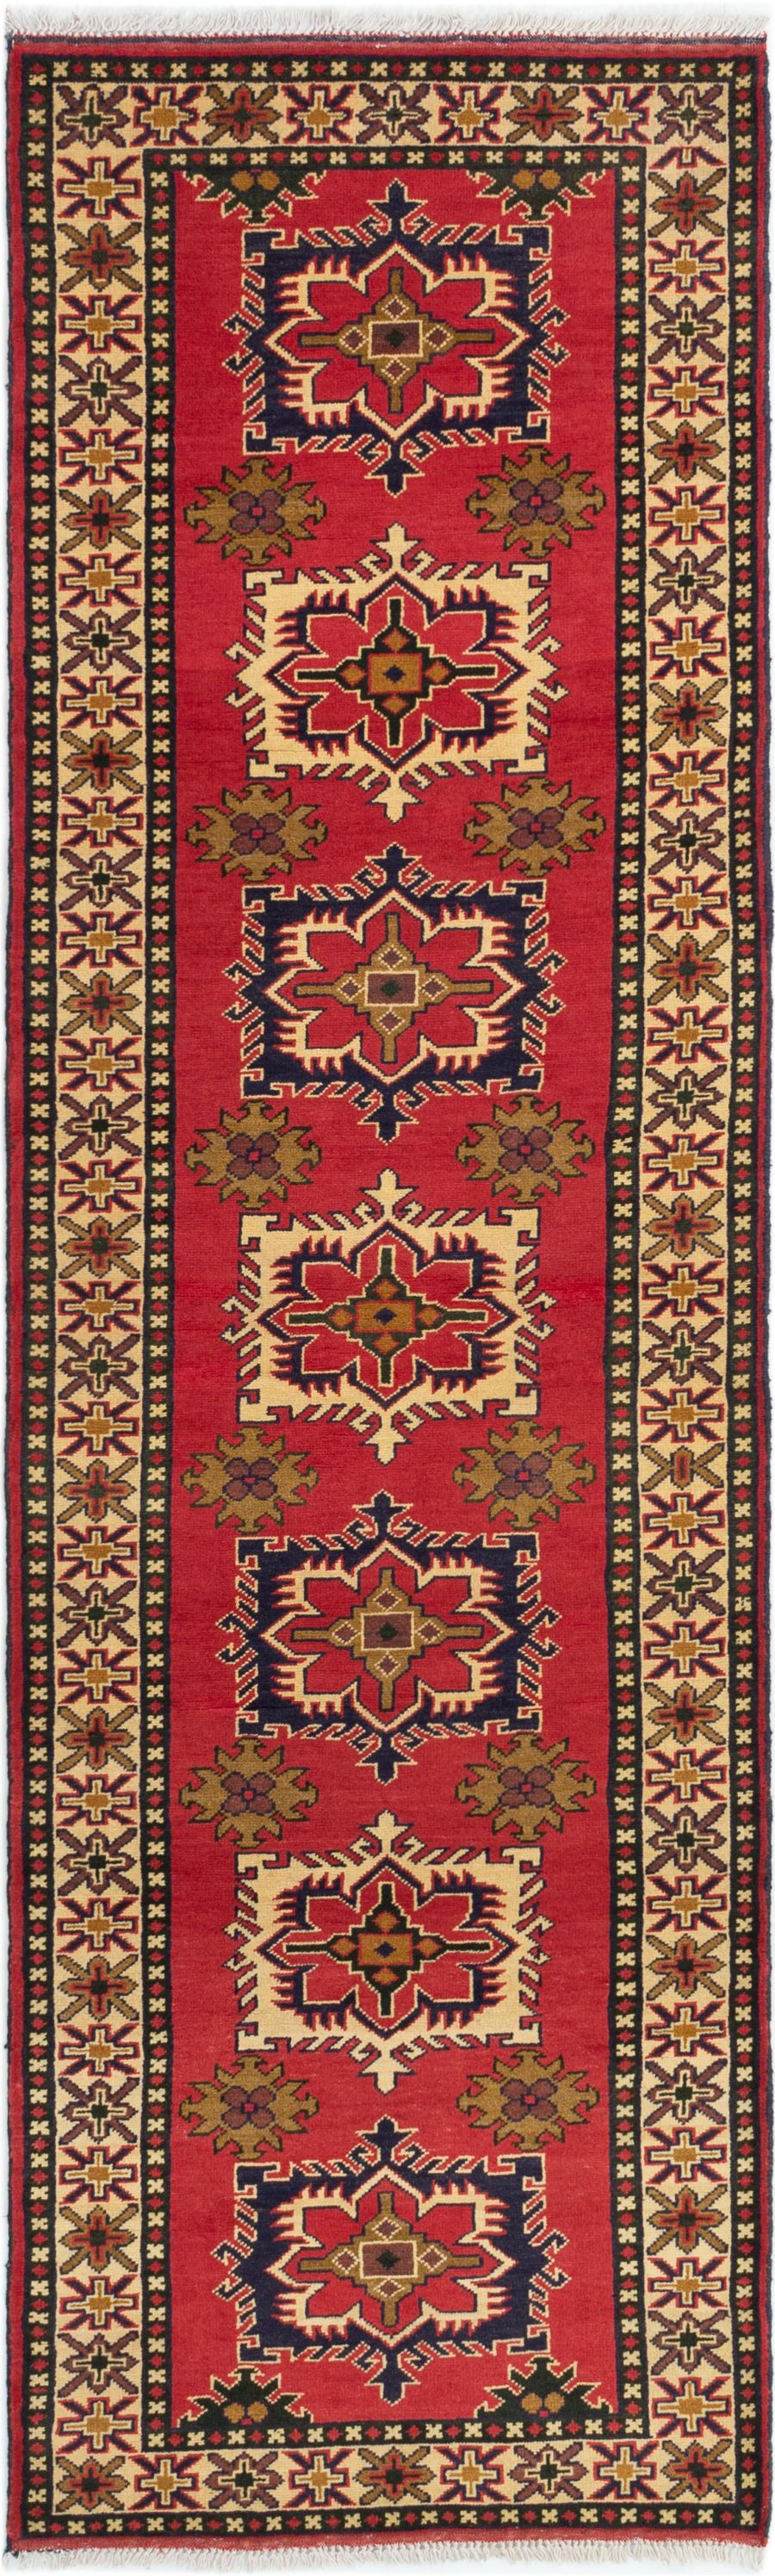 Hand-knotted Finest Kargahi Red Wool Rug 2'9" x 9'4" Size: 2'9" x 9'4"  